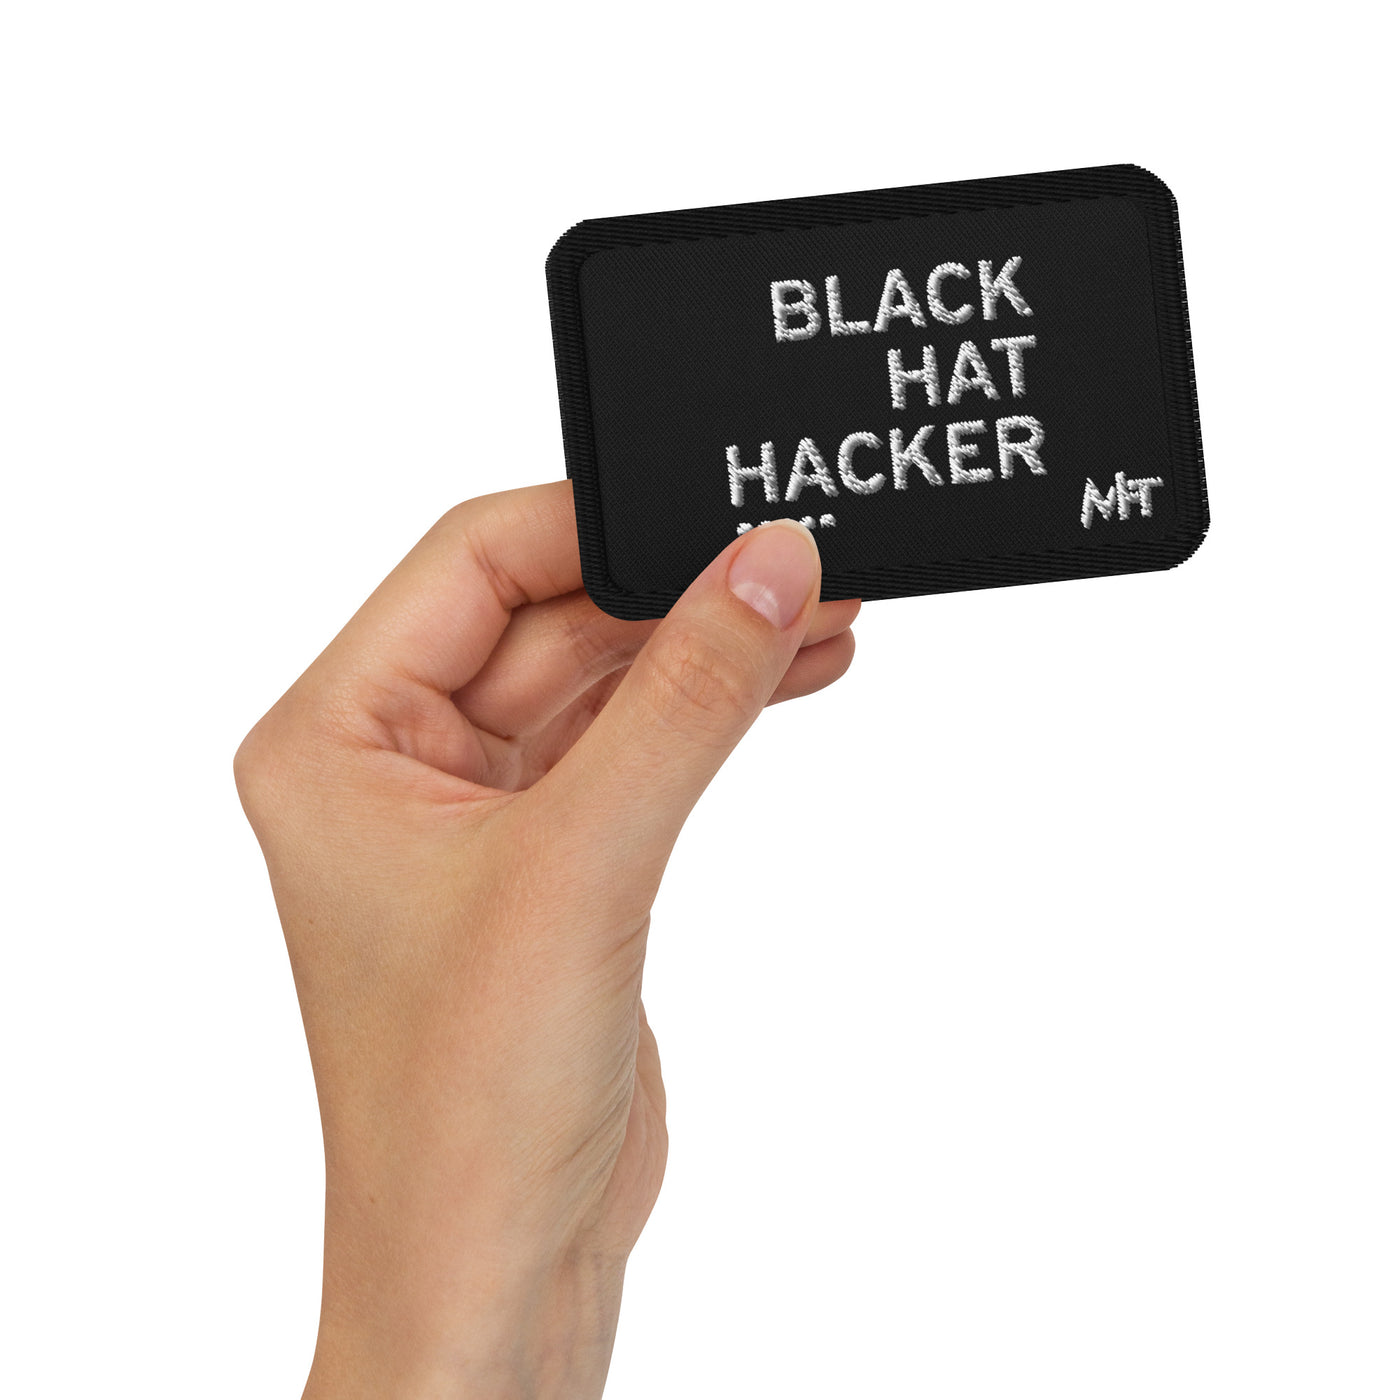 Black Hat Hacker V11 - Embroidered patches